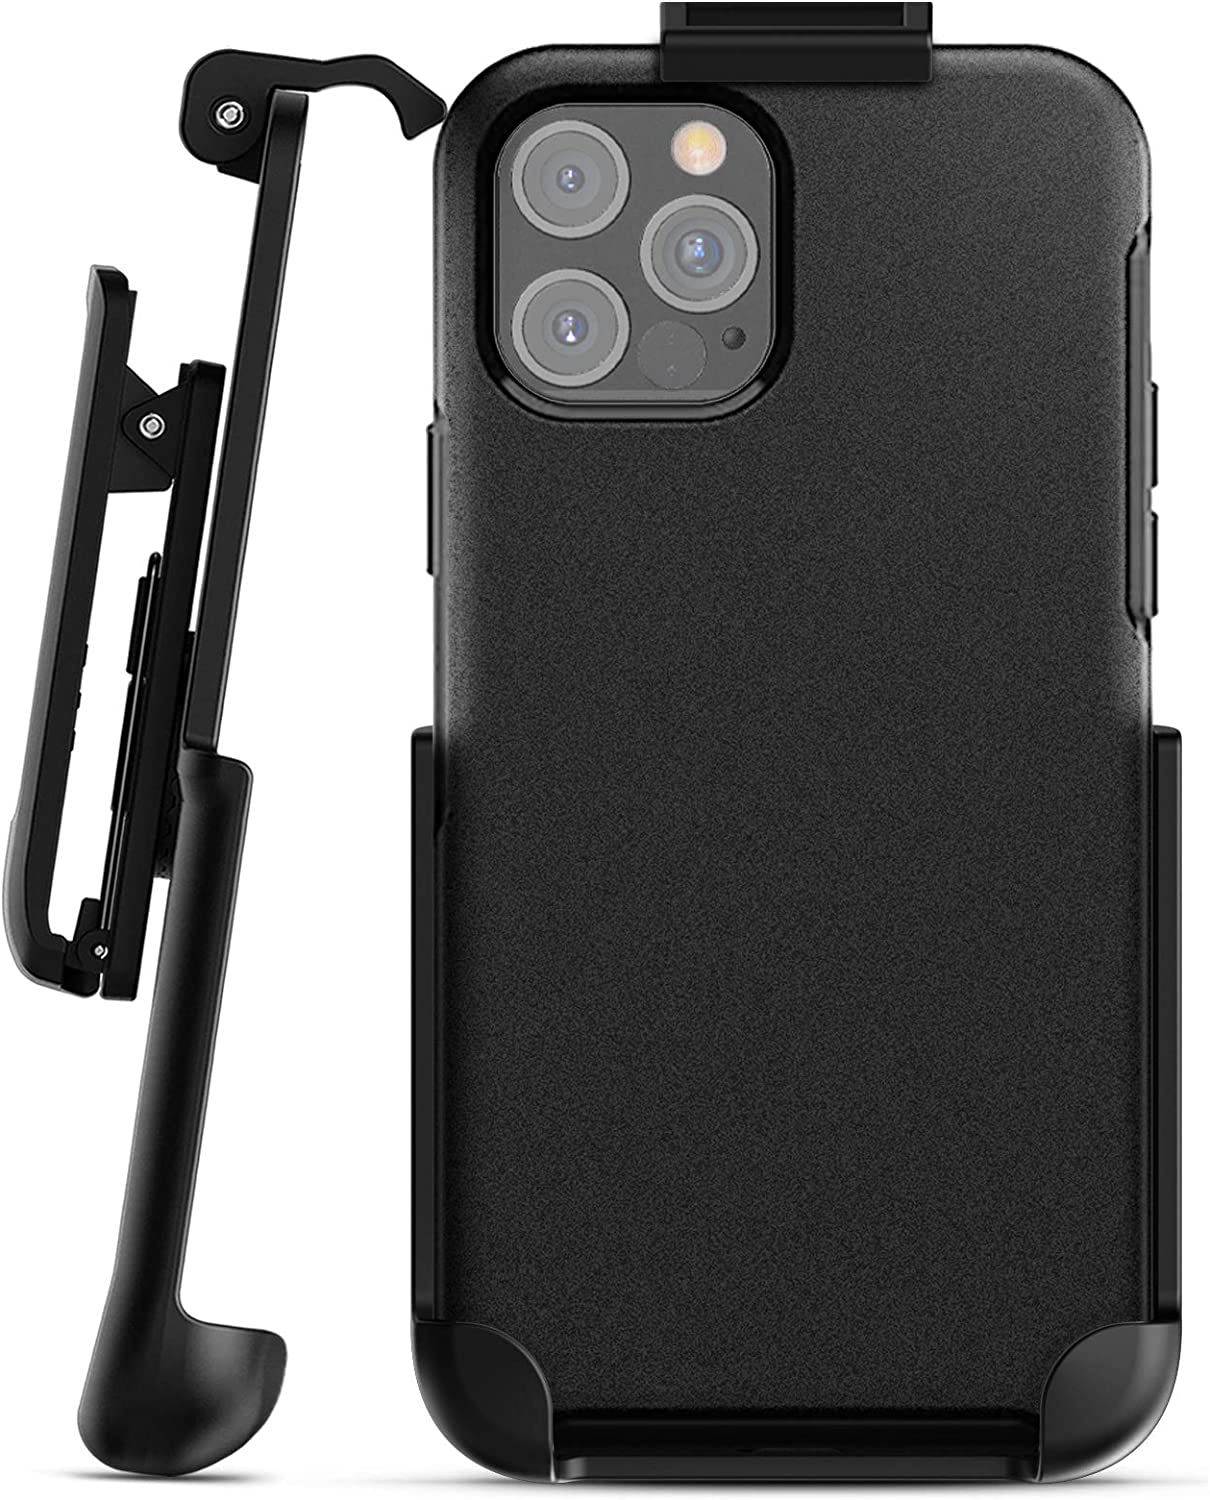 IPHONE 12 PRO HOLSTER CASE